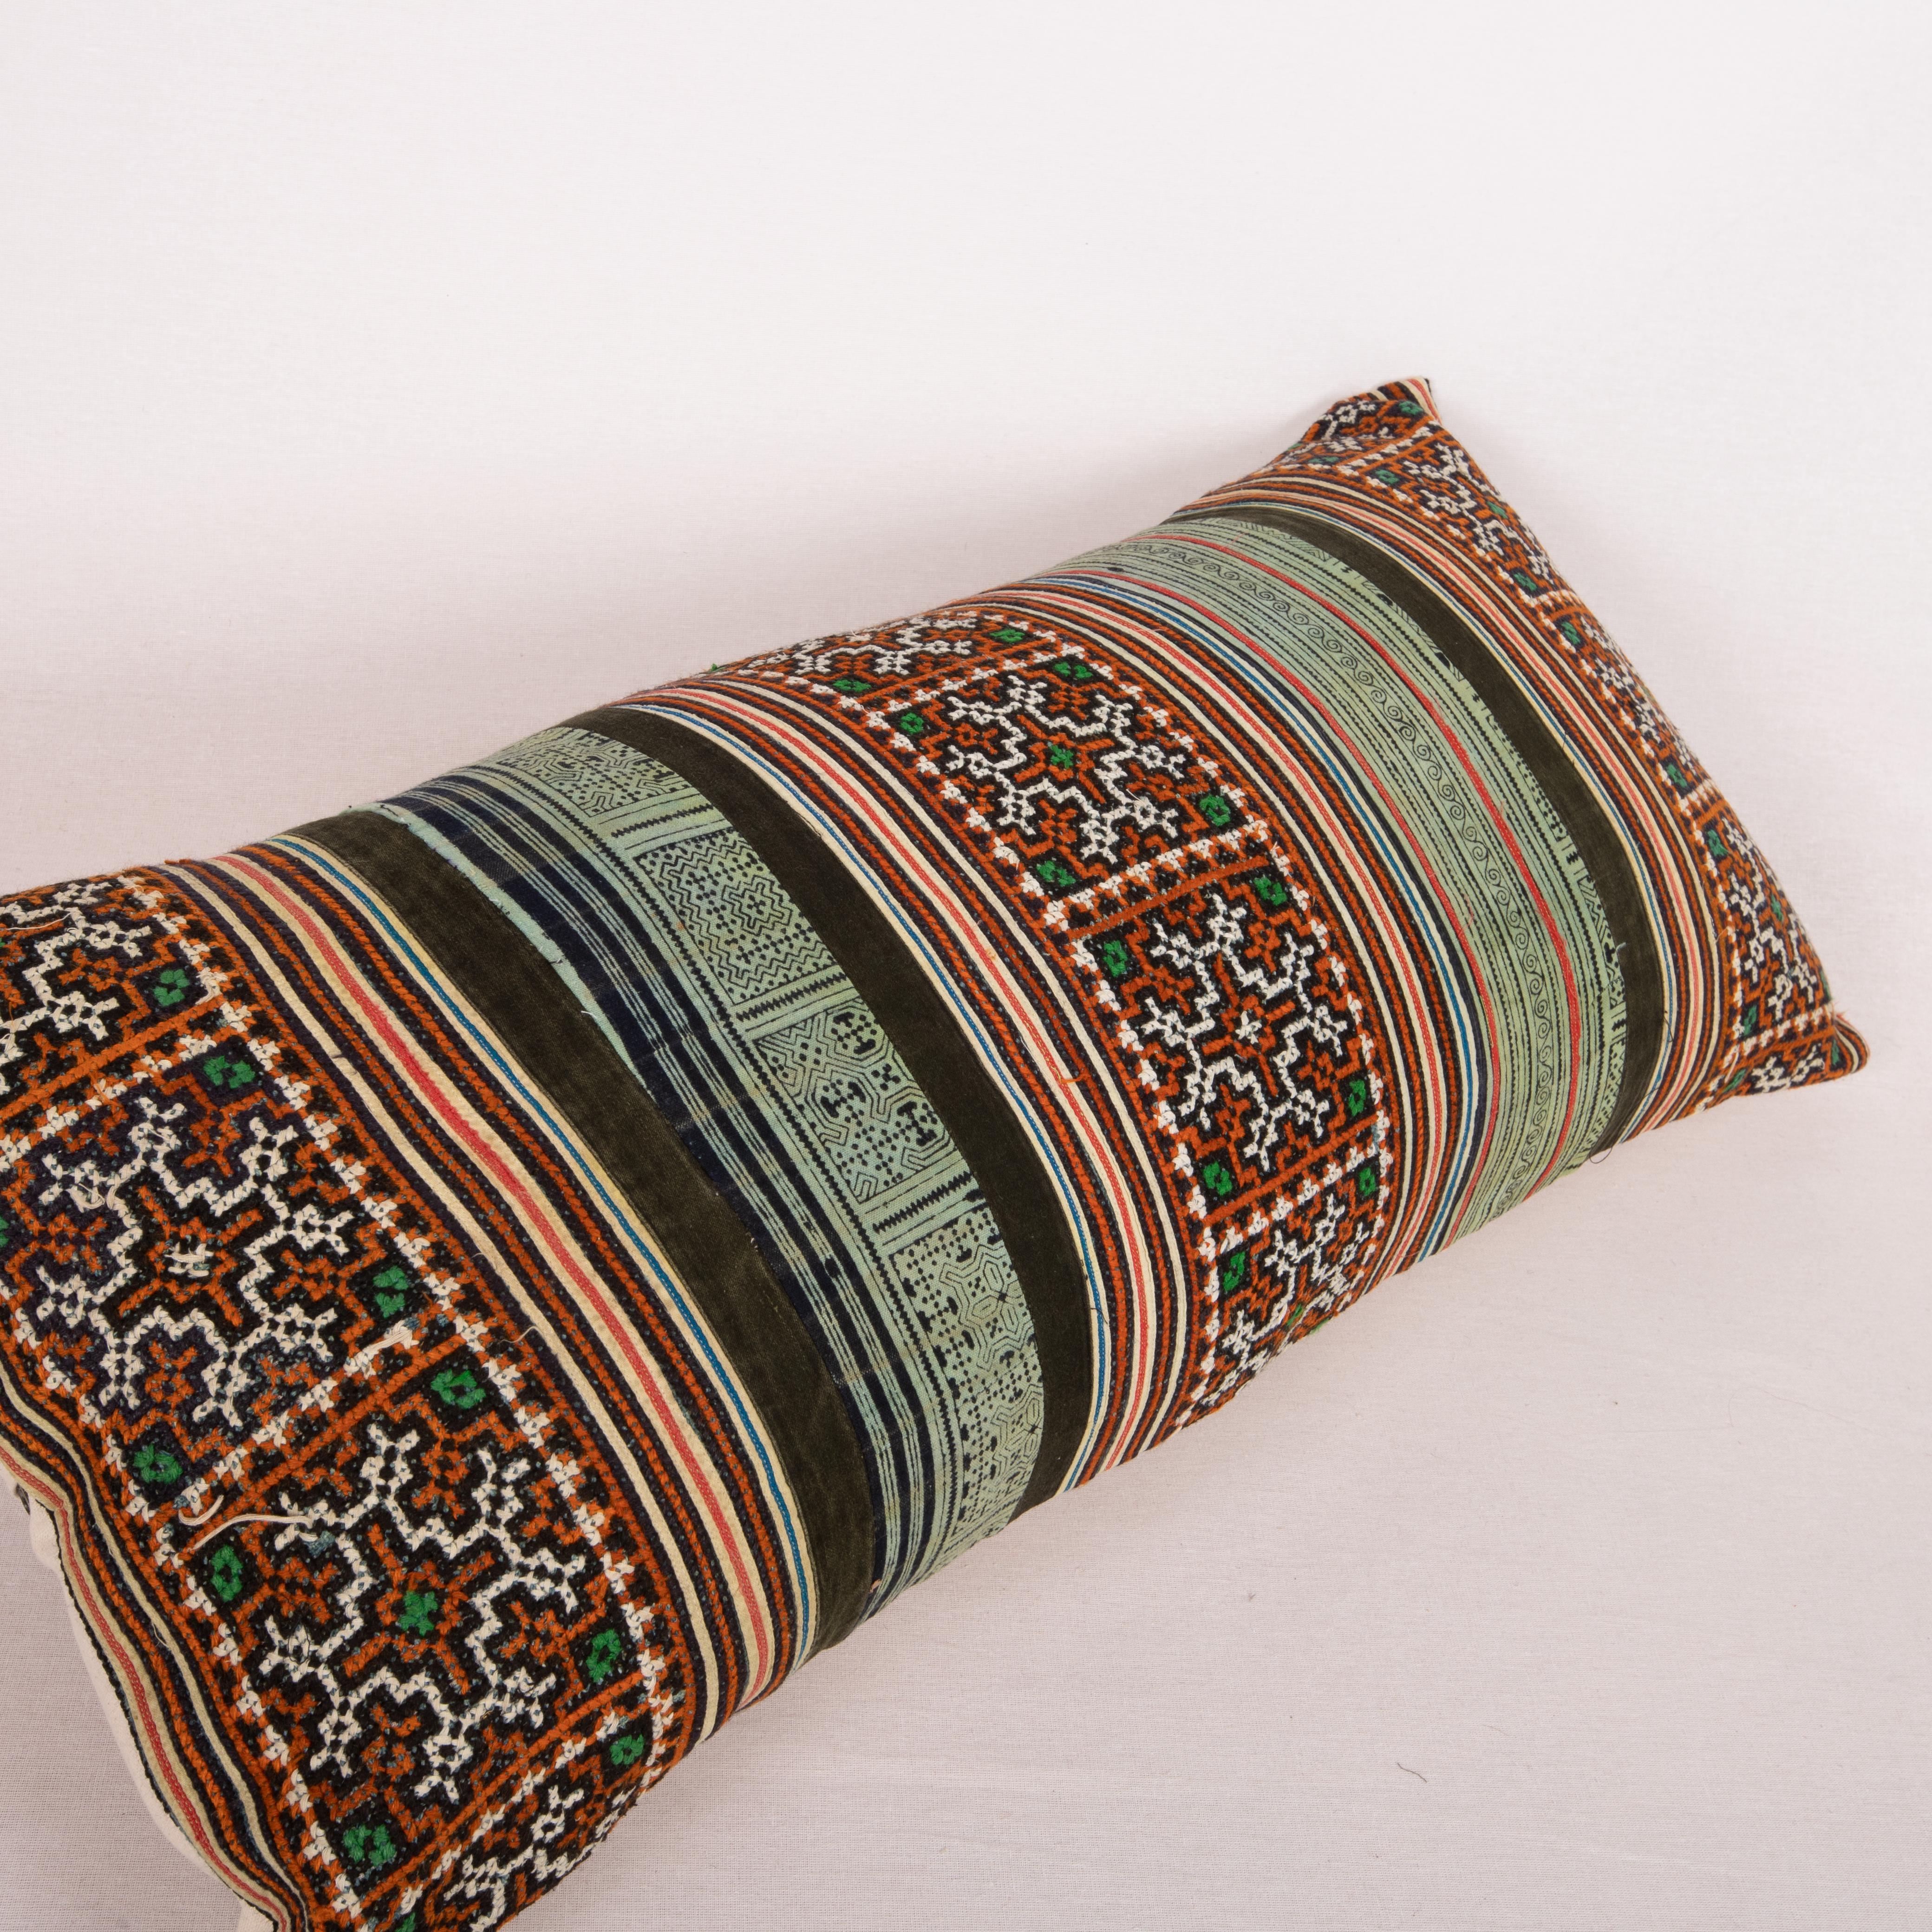 Cotton Pillow Case Made from Hmong Hill Tribe Batik Textile Mid 20th C